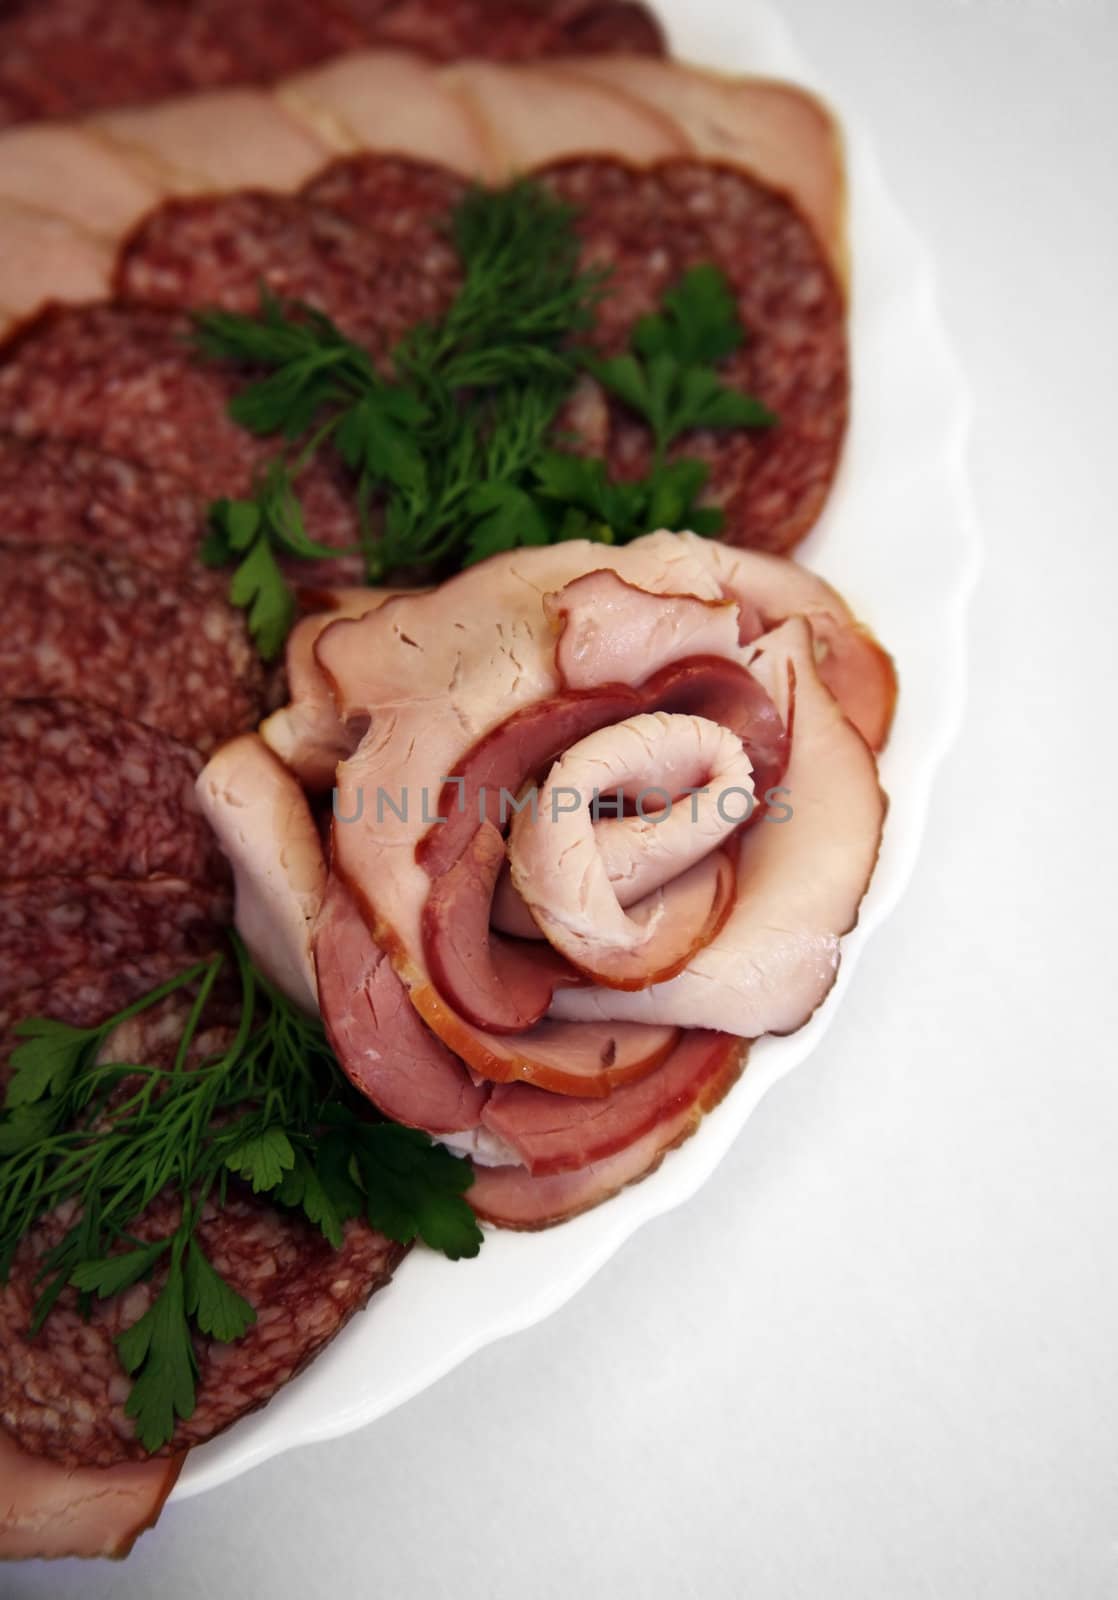 The cut sausage on a white plate